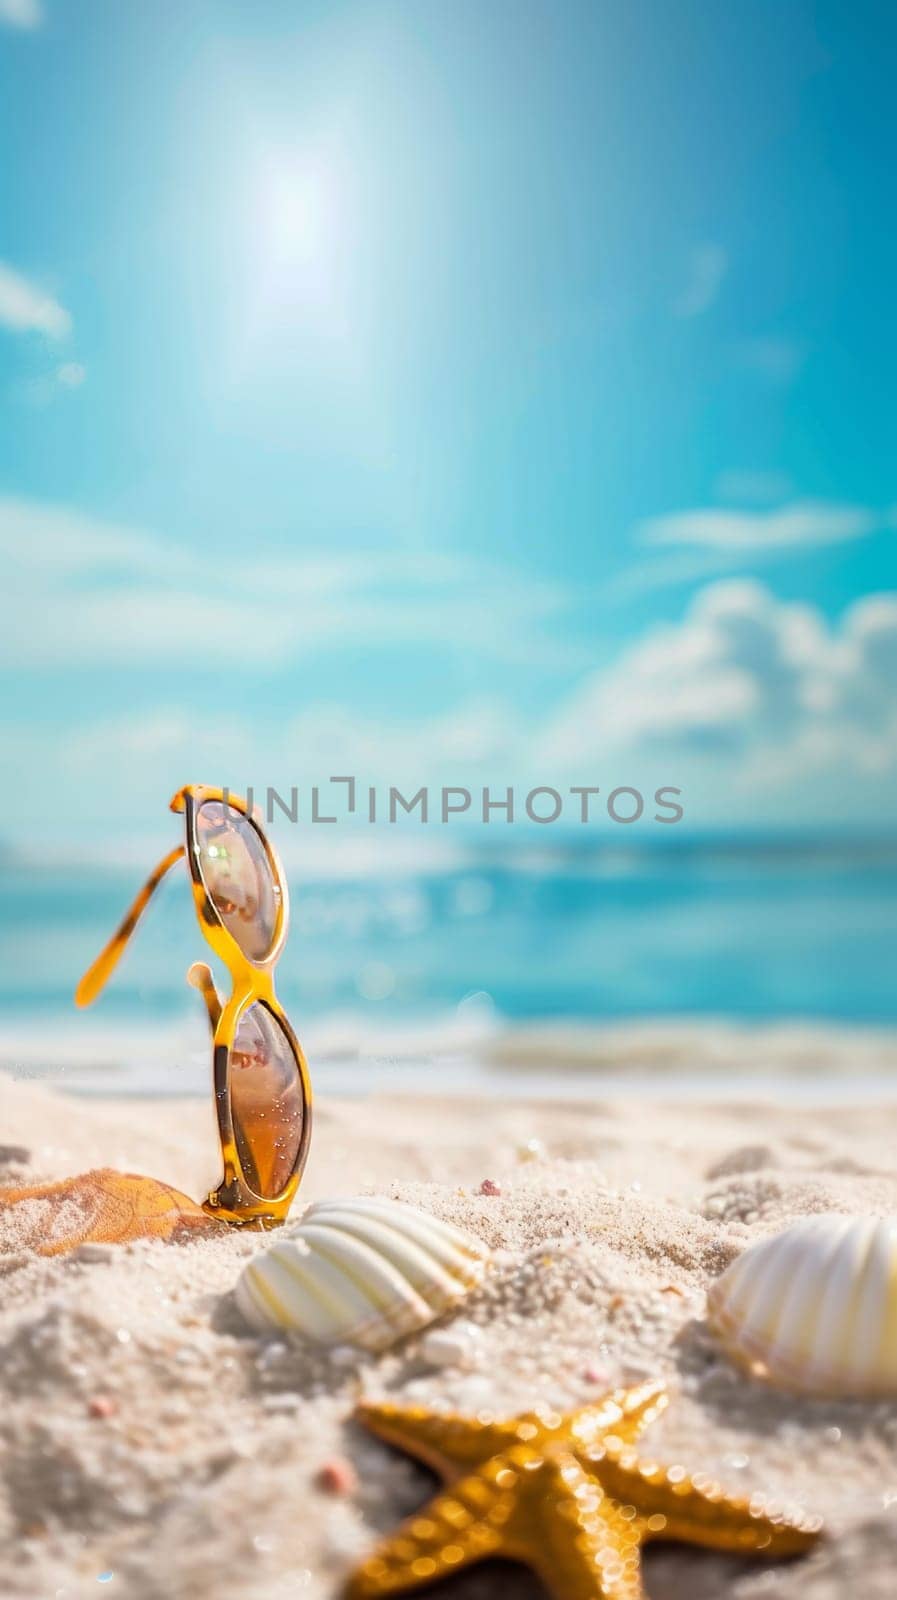 A pair of sunglasses stands sentinel on the sandy shore, flanked by starfish and seashells, under the watchful gaze of the summer sun.